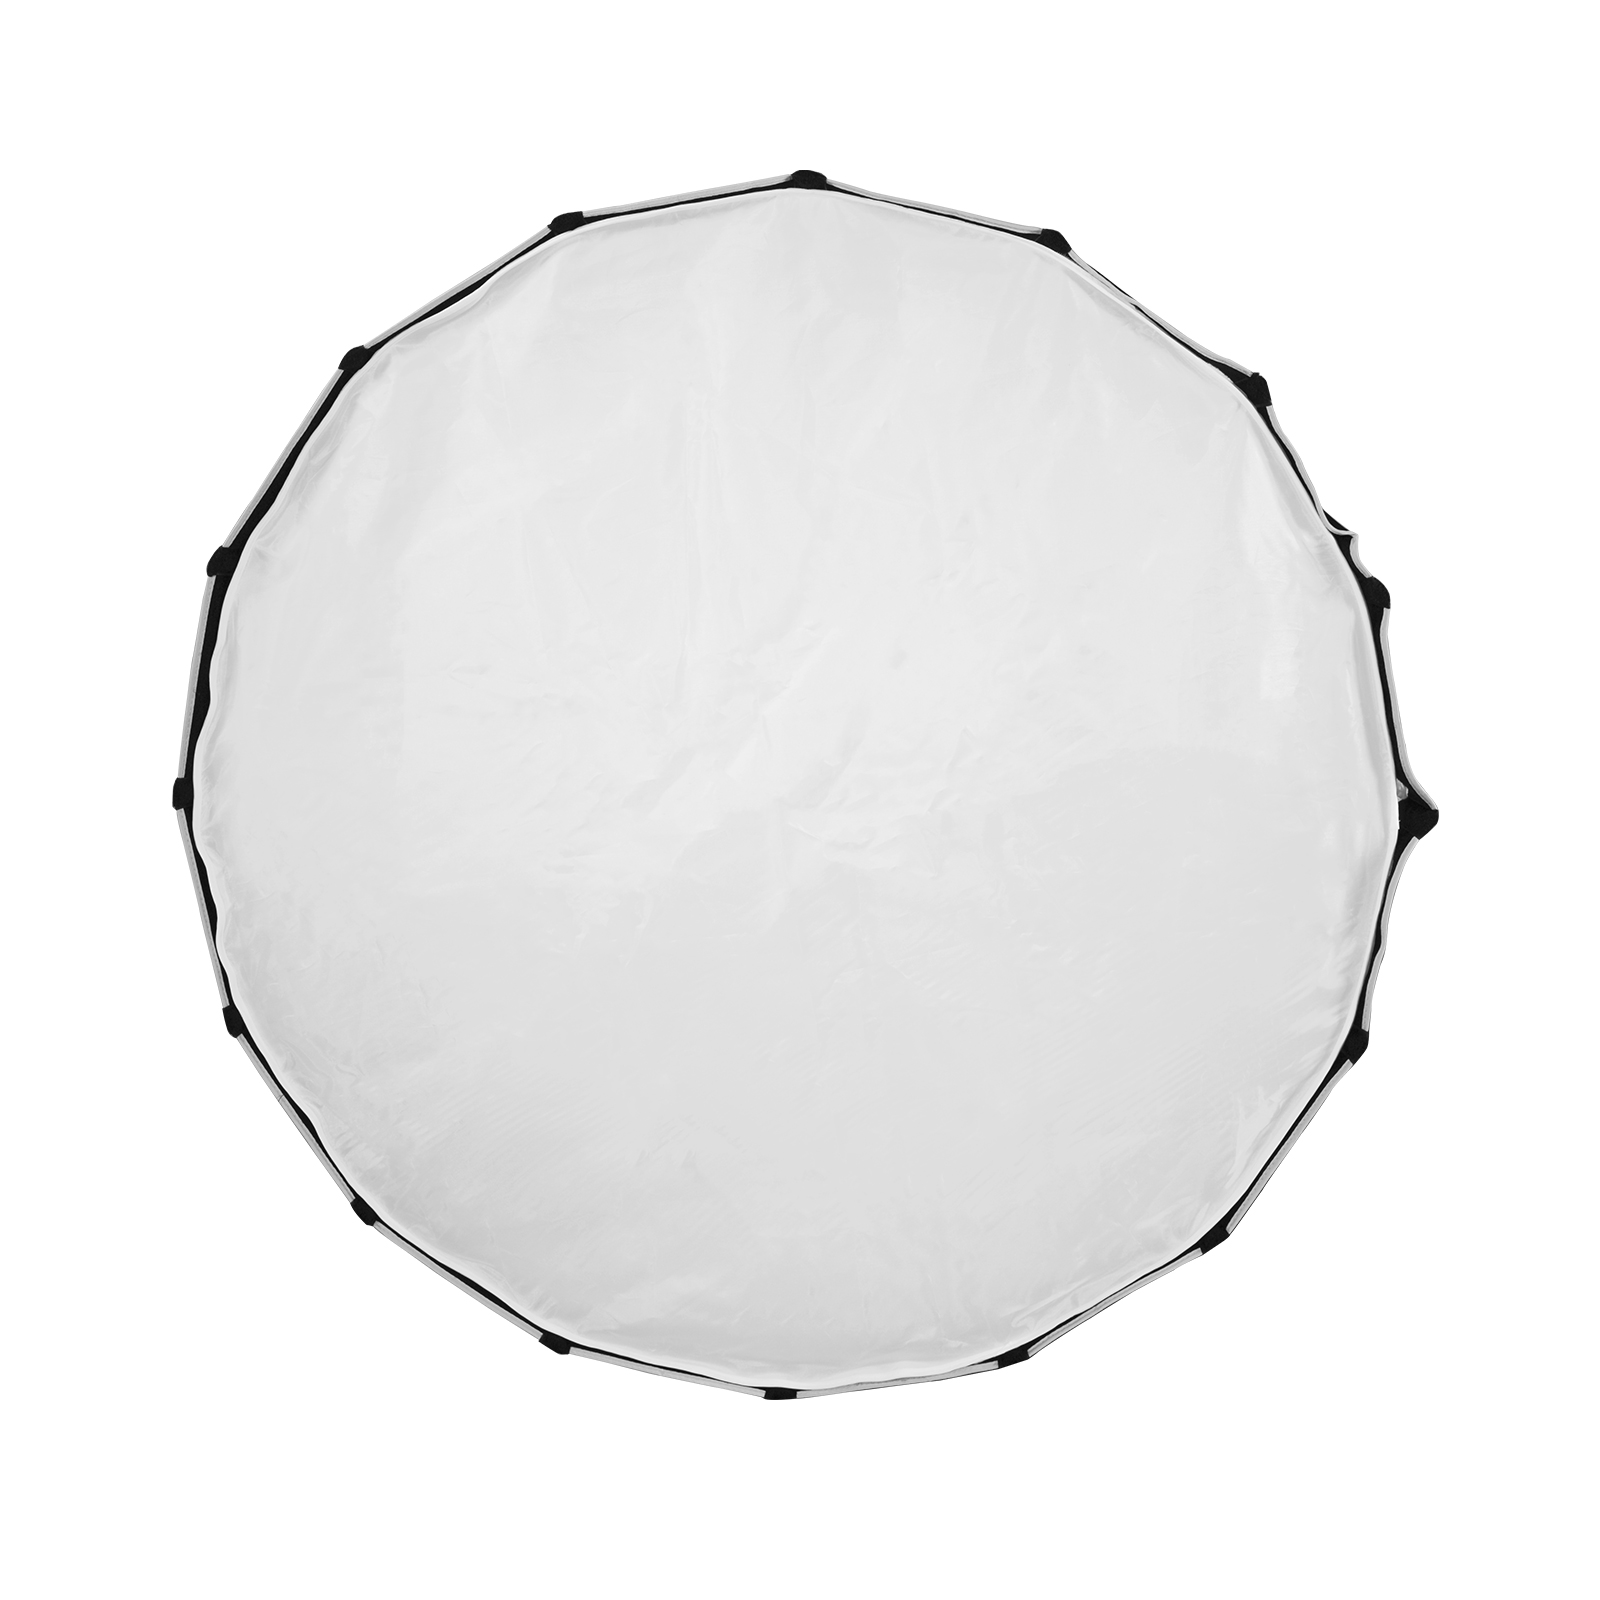 Pixel F60 LED Parabolic Softbox, soft light, delicate and even.